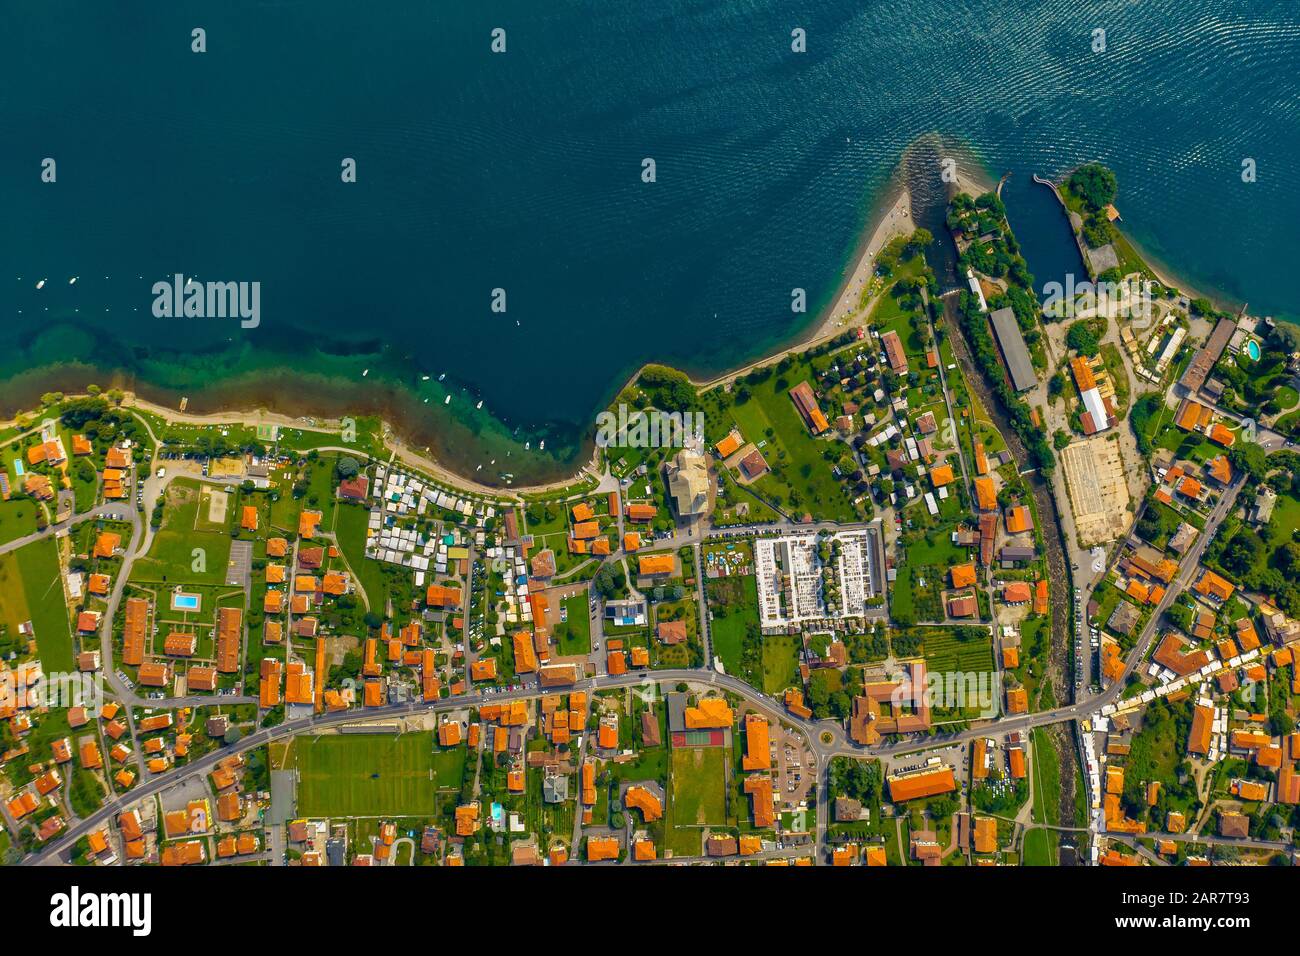 Aerial view of Como lake, Dongo, Italy. Coastline is washed by blue turquoise water Stock Photo